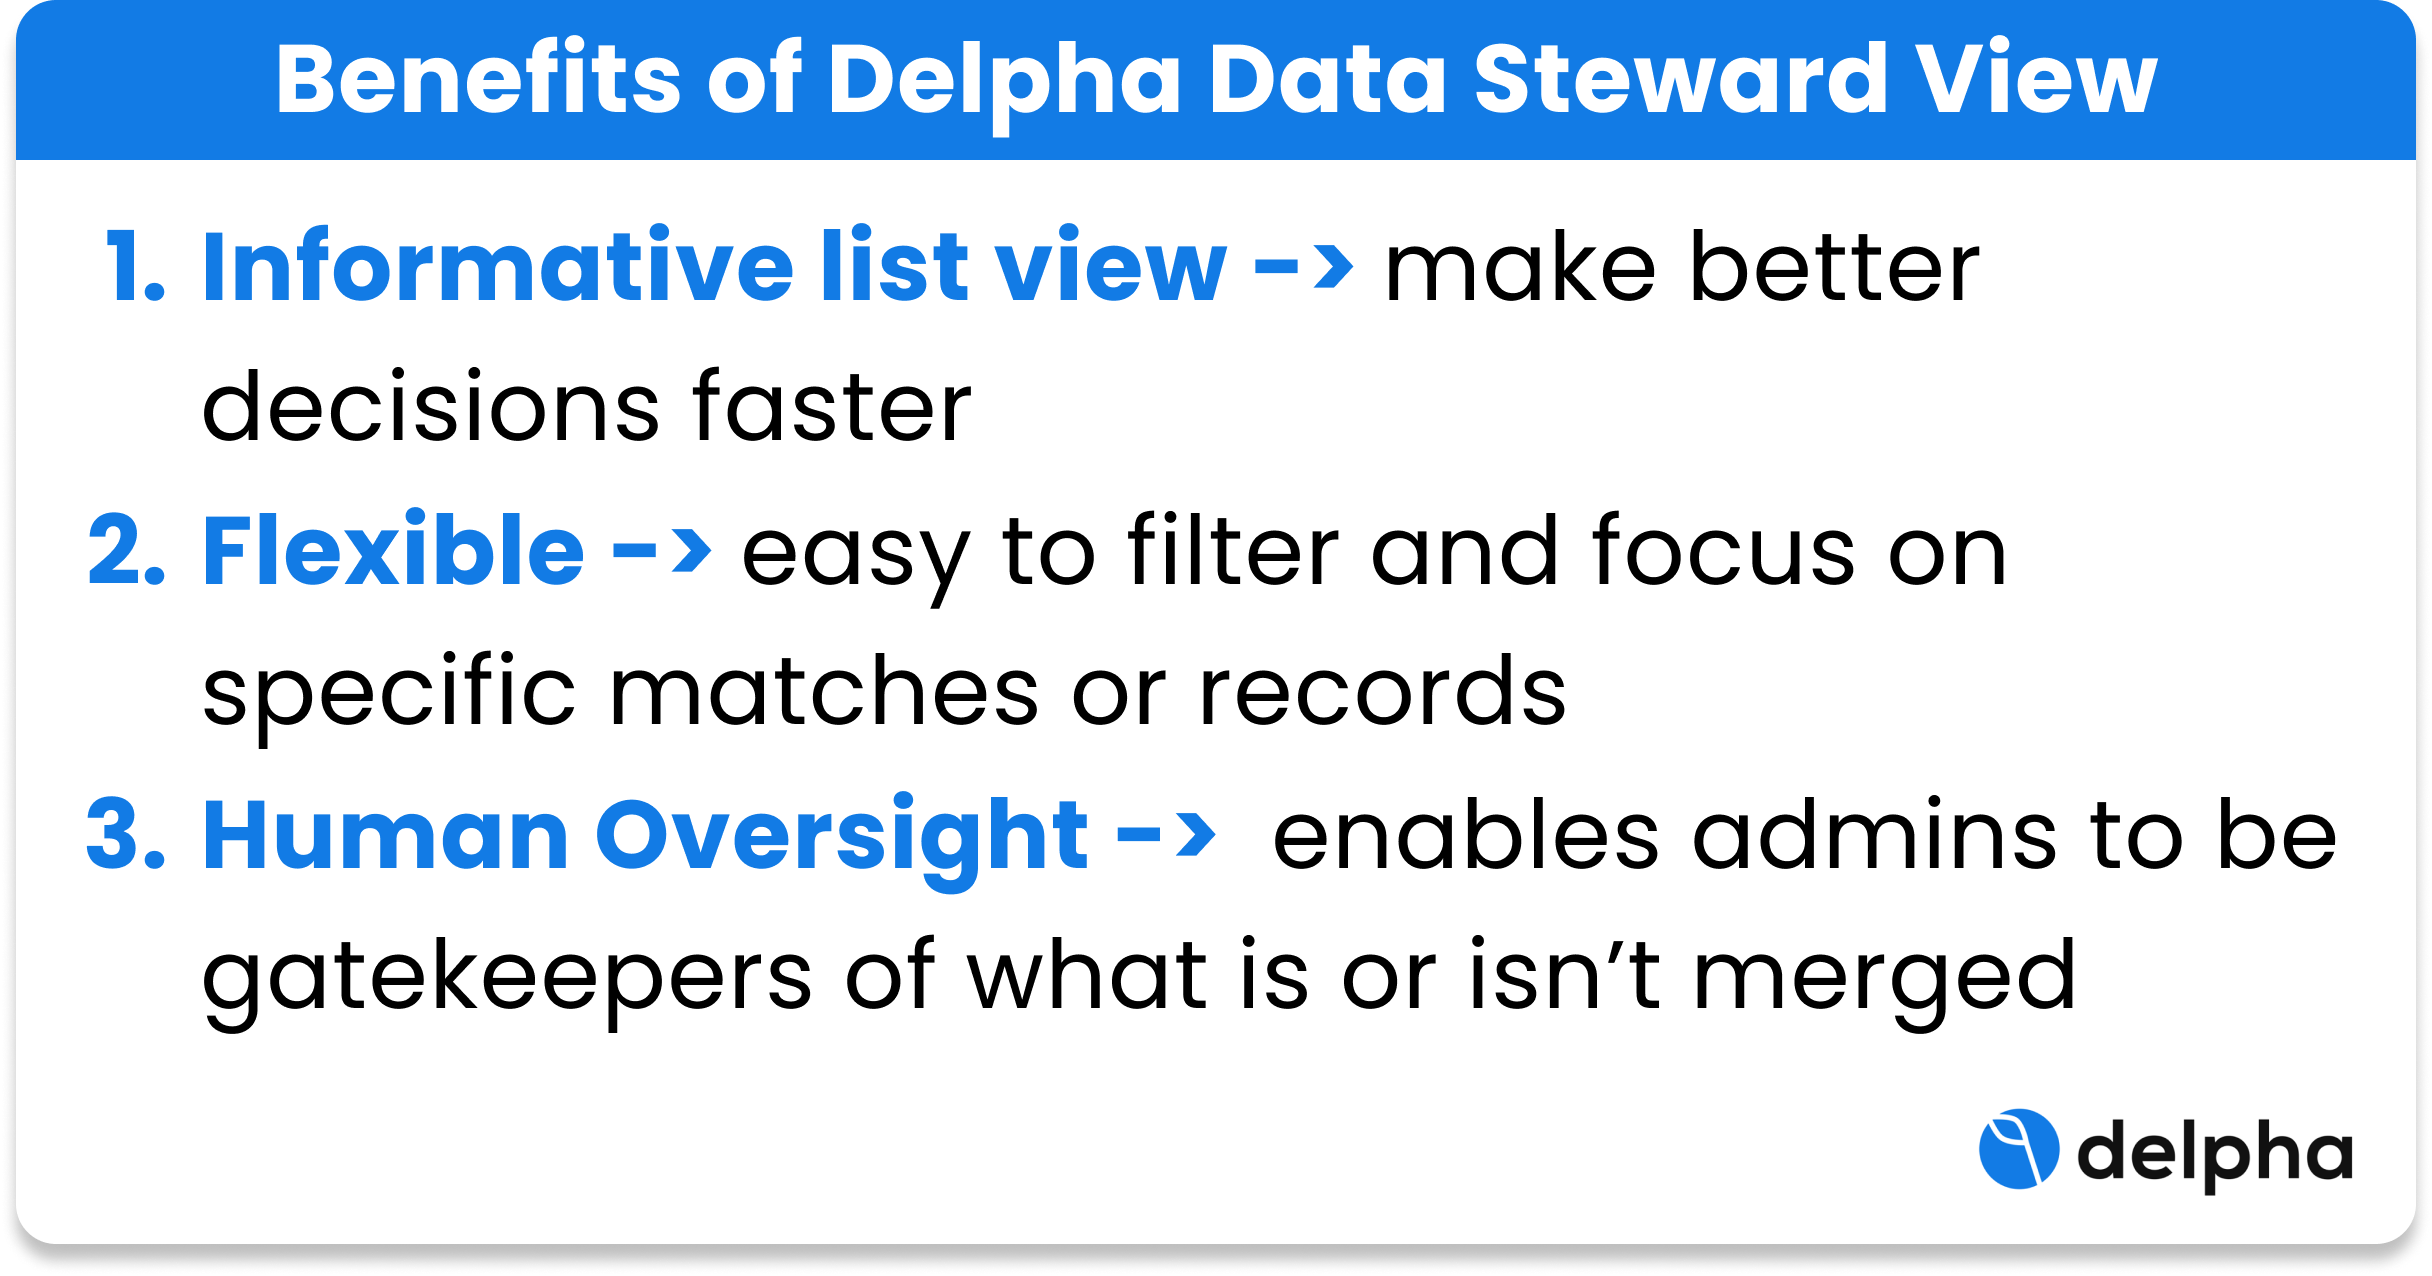 Summary of the benefits of using Delpha's Data Steward View